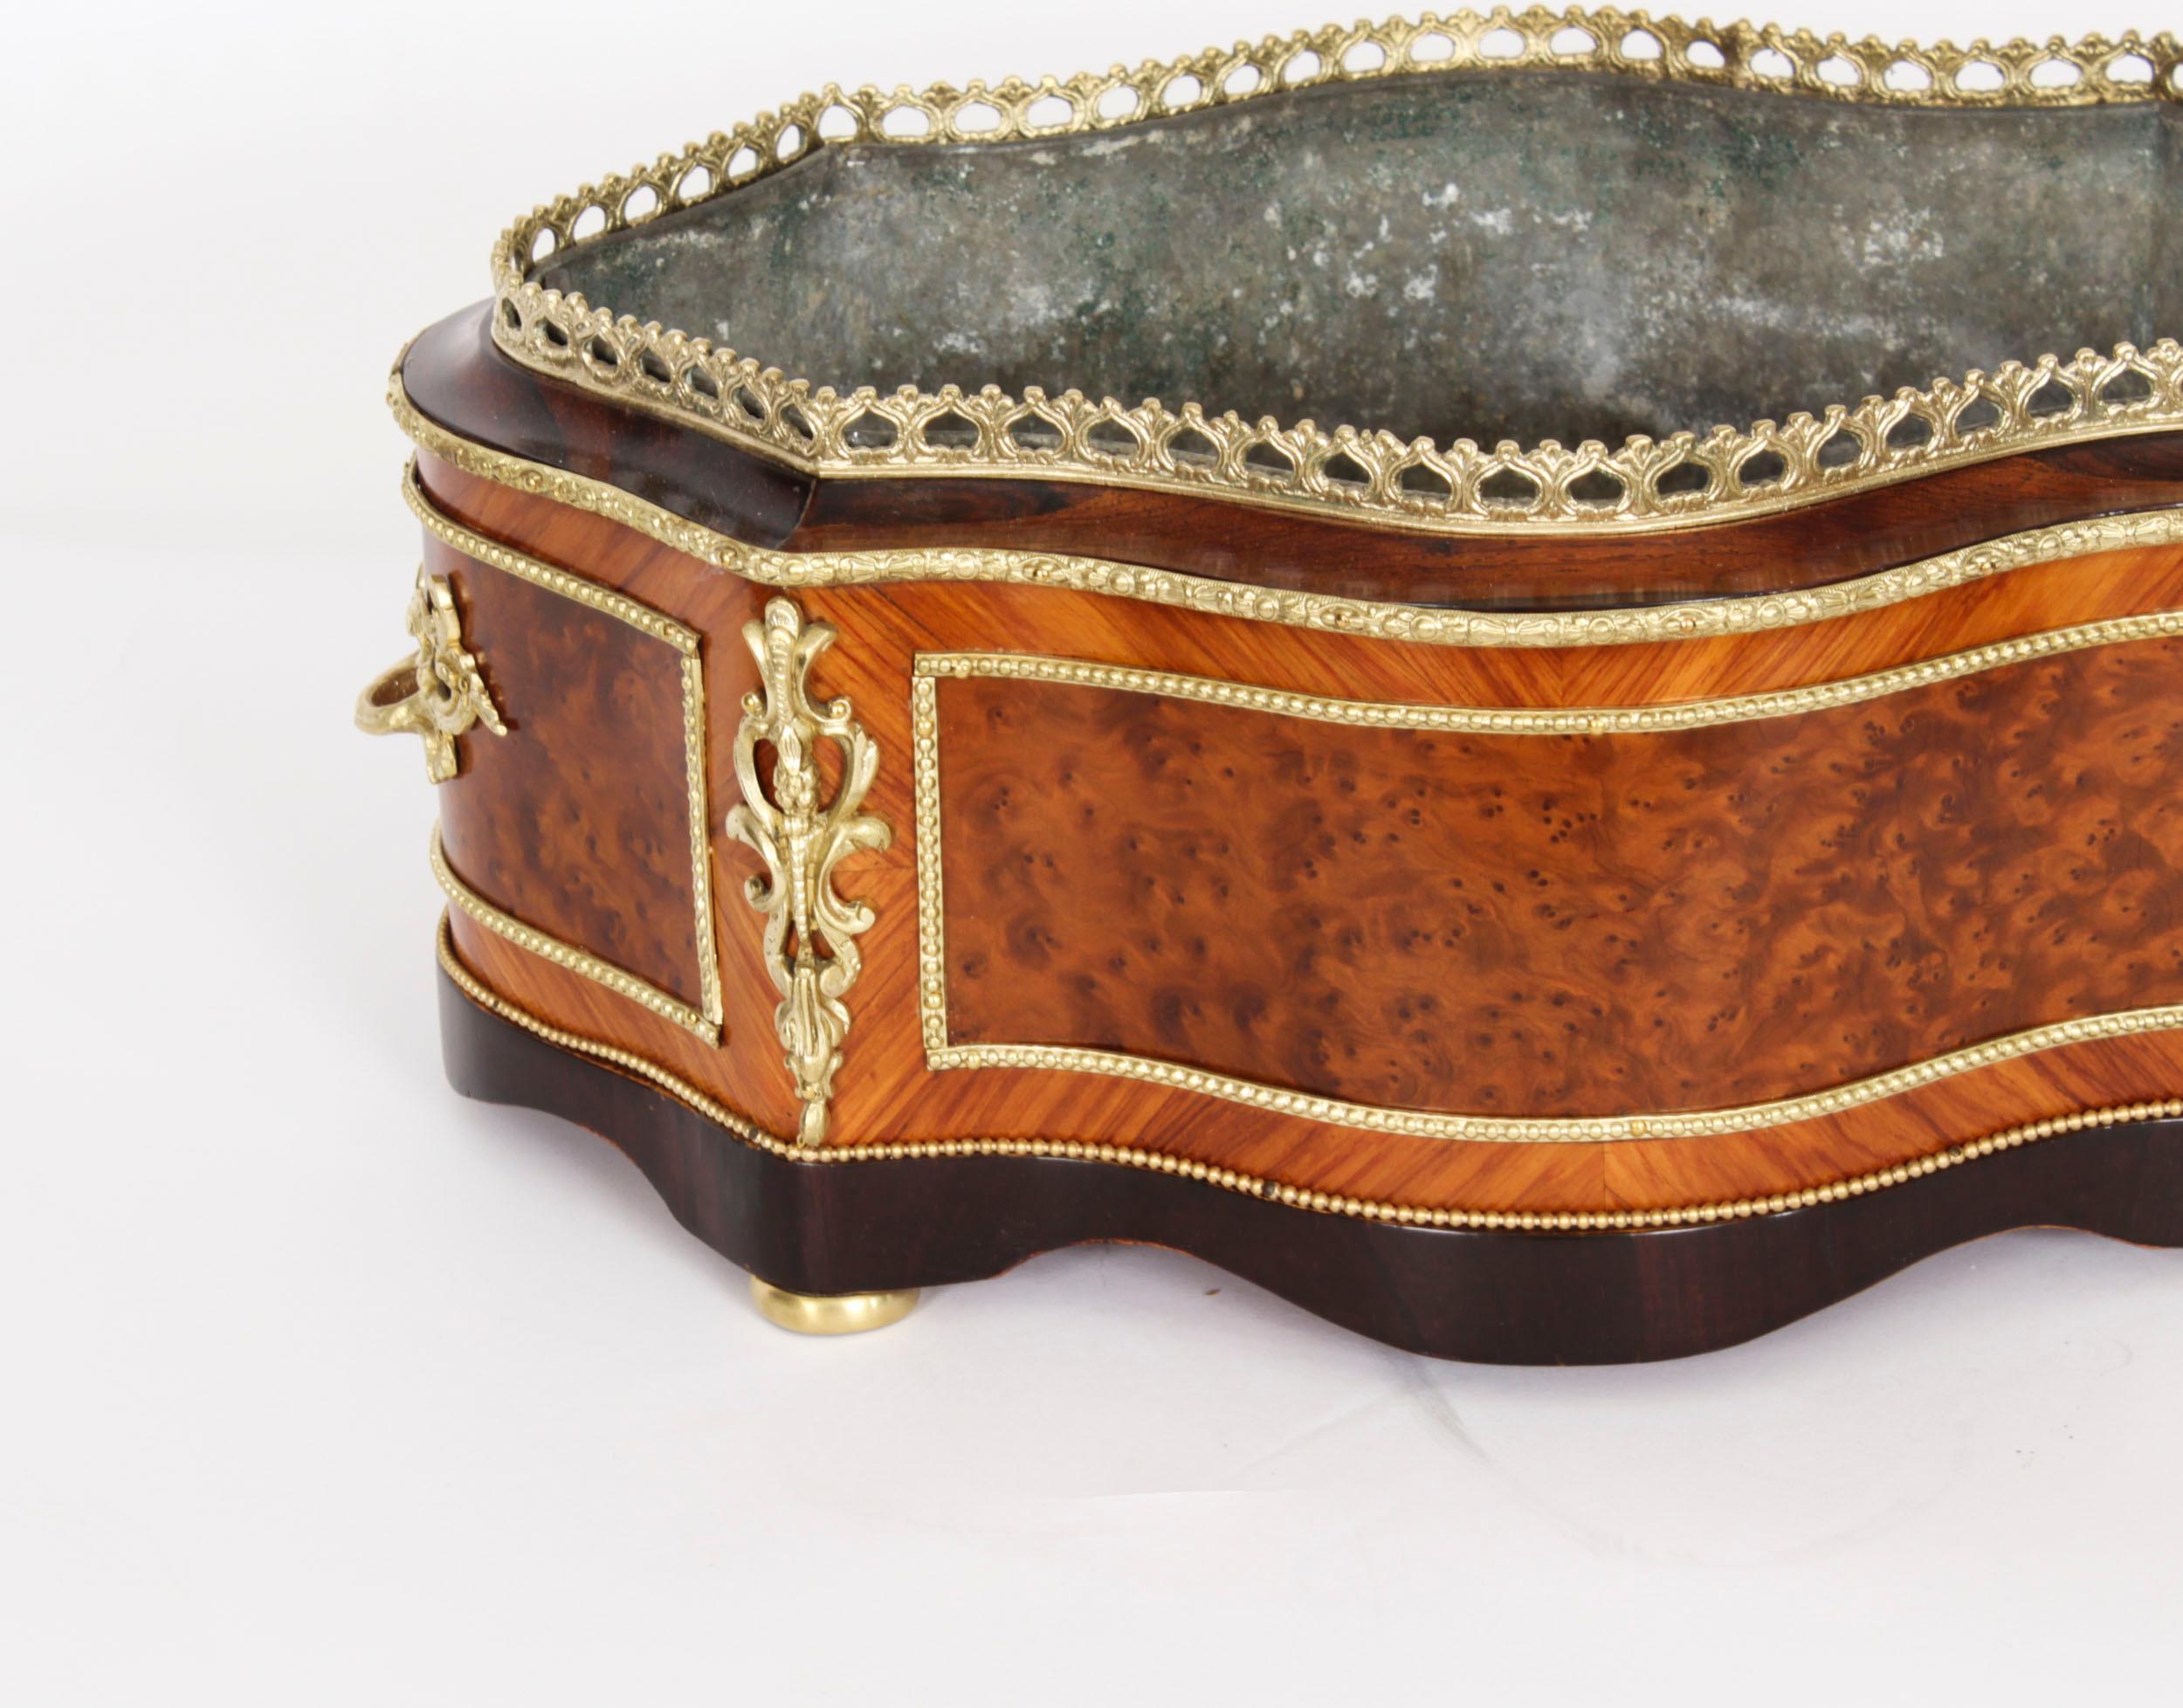 Antique French Ormolu Mounted Planter Jardiniere 19th Century In Good Condition For Sale In London, GB